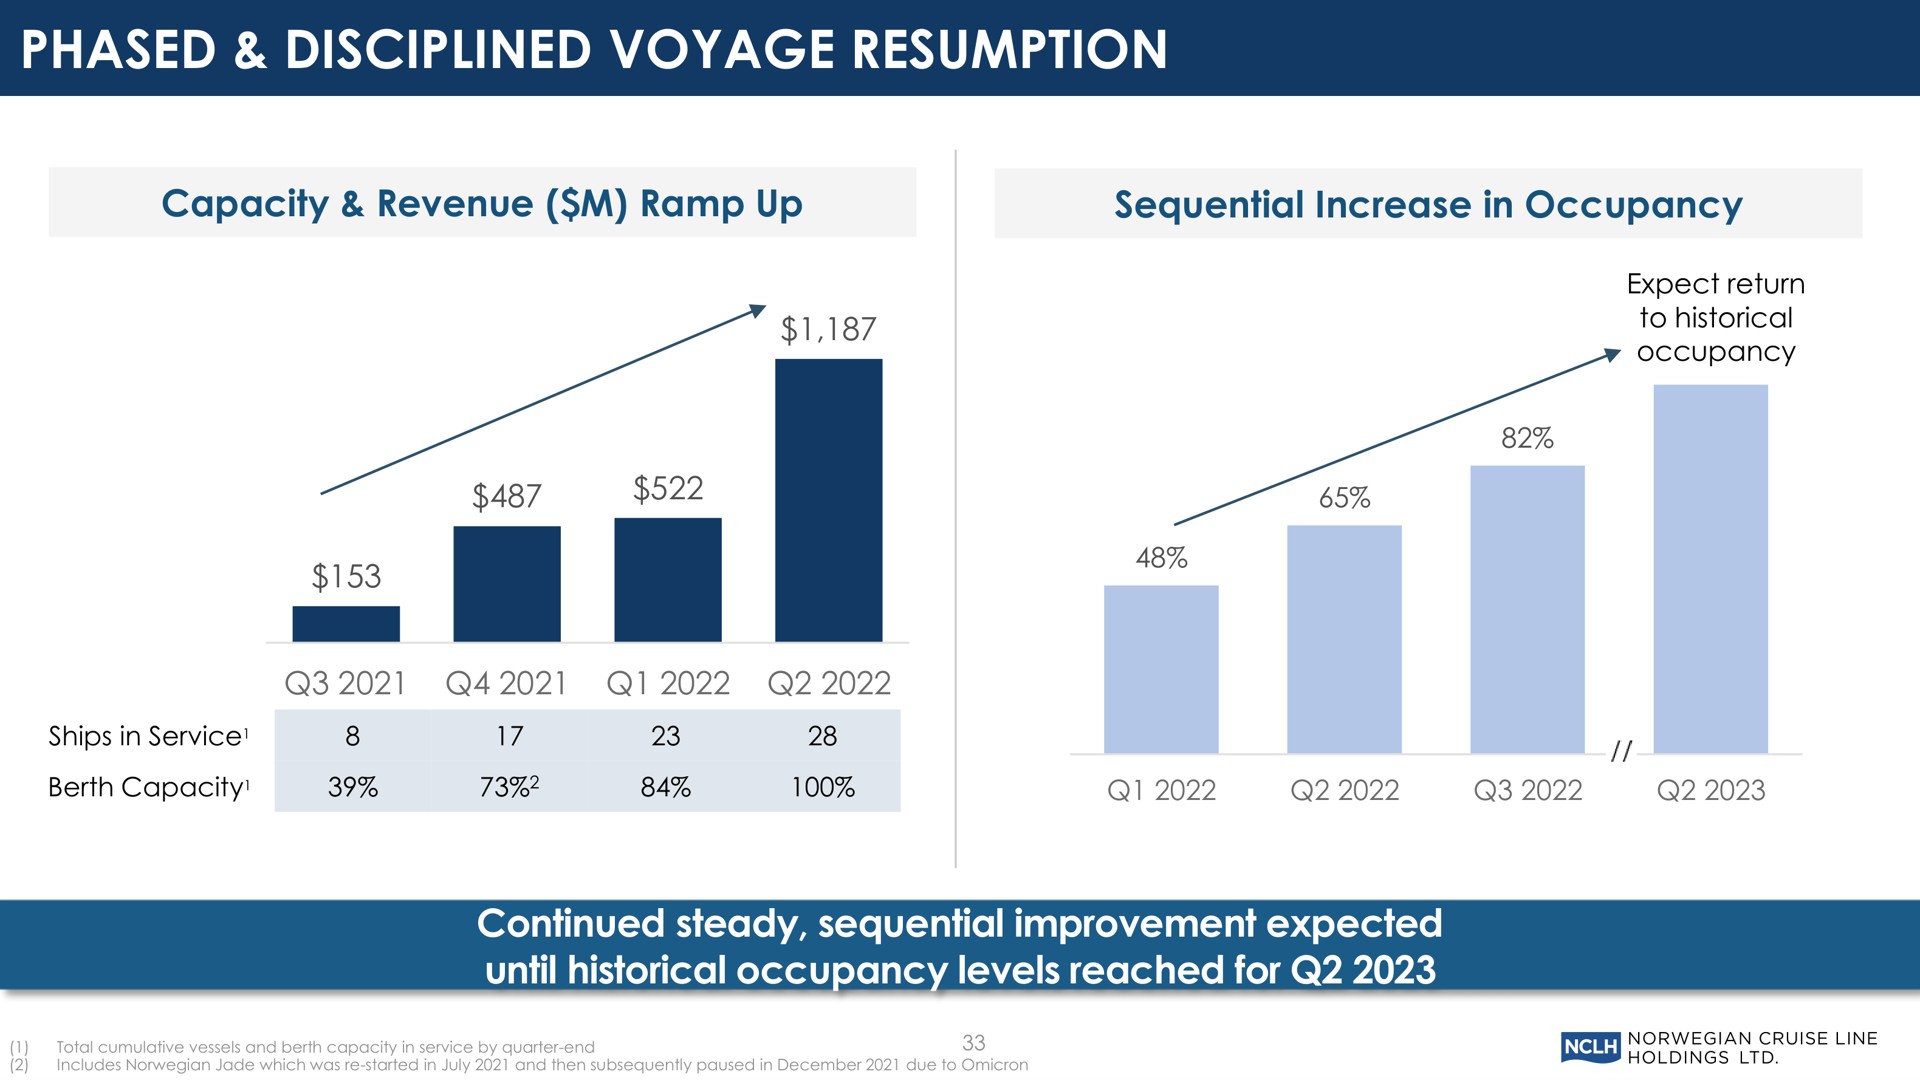 phased disciplined voyage resumption continued steady sequential improvement expected until historical occupancy levels reached for | Norwegian Cruise Line